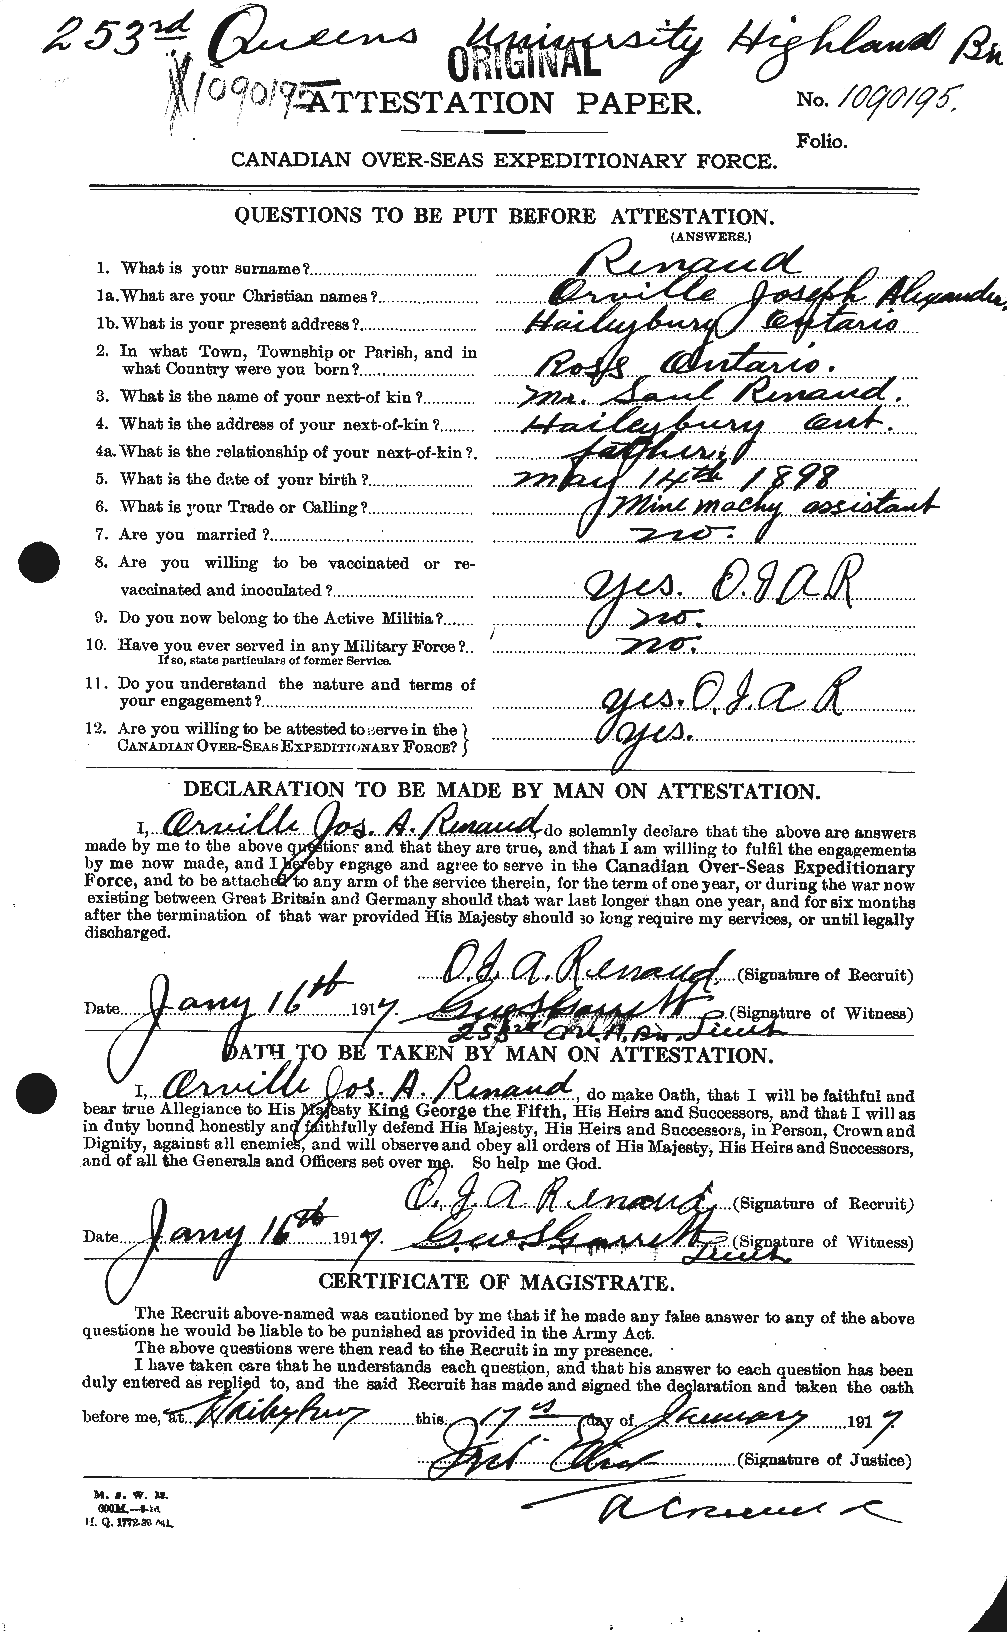 Personnel Records of the First World War - CEF 599711a